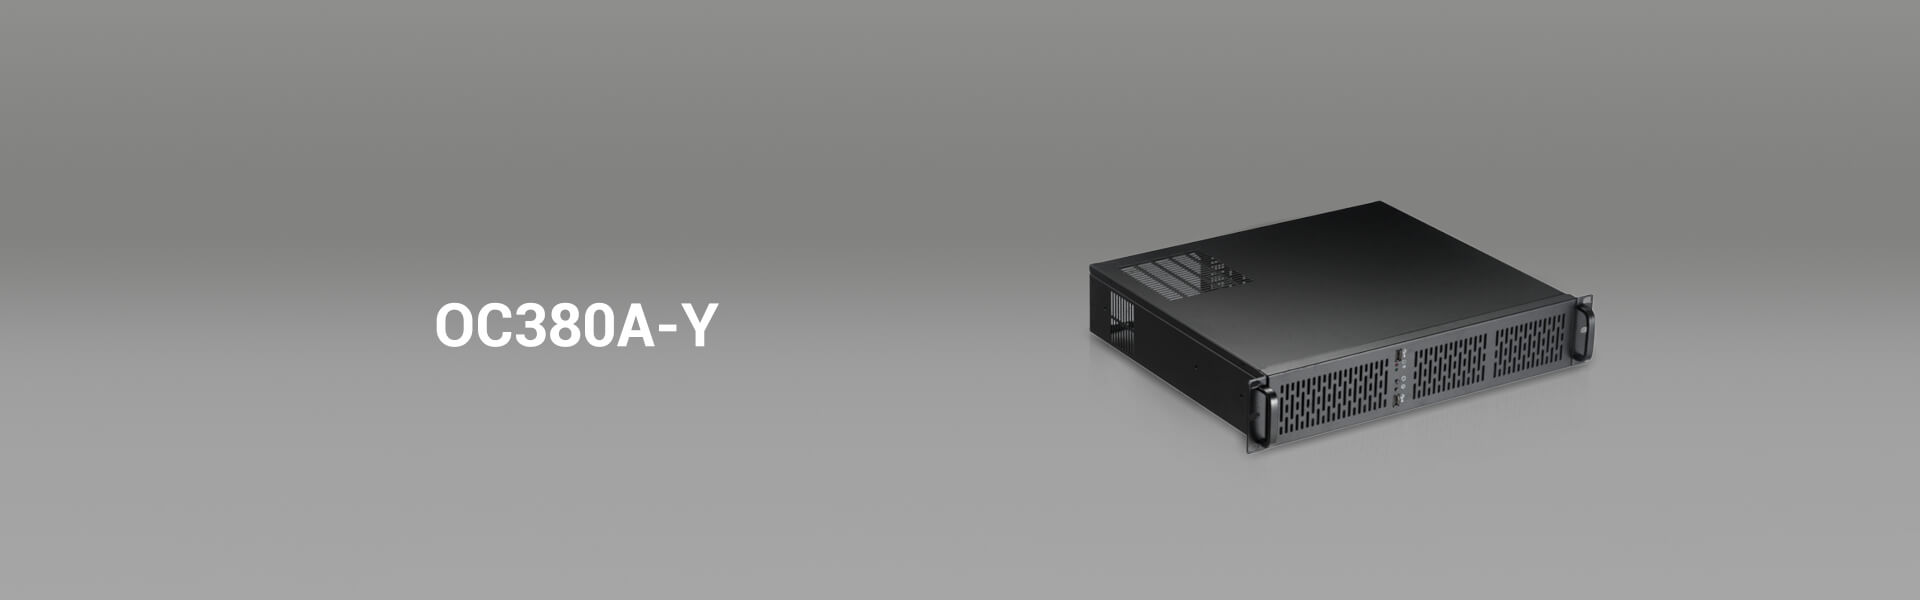 rackmount chassis-OC380A-Y-onechassis -banner